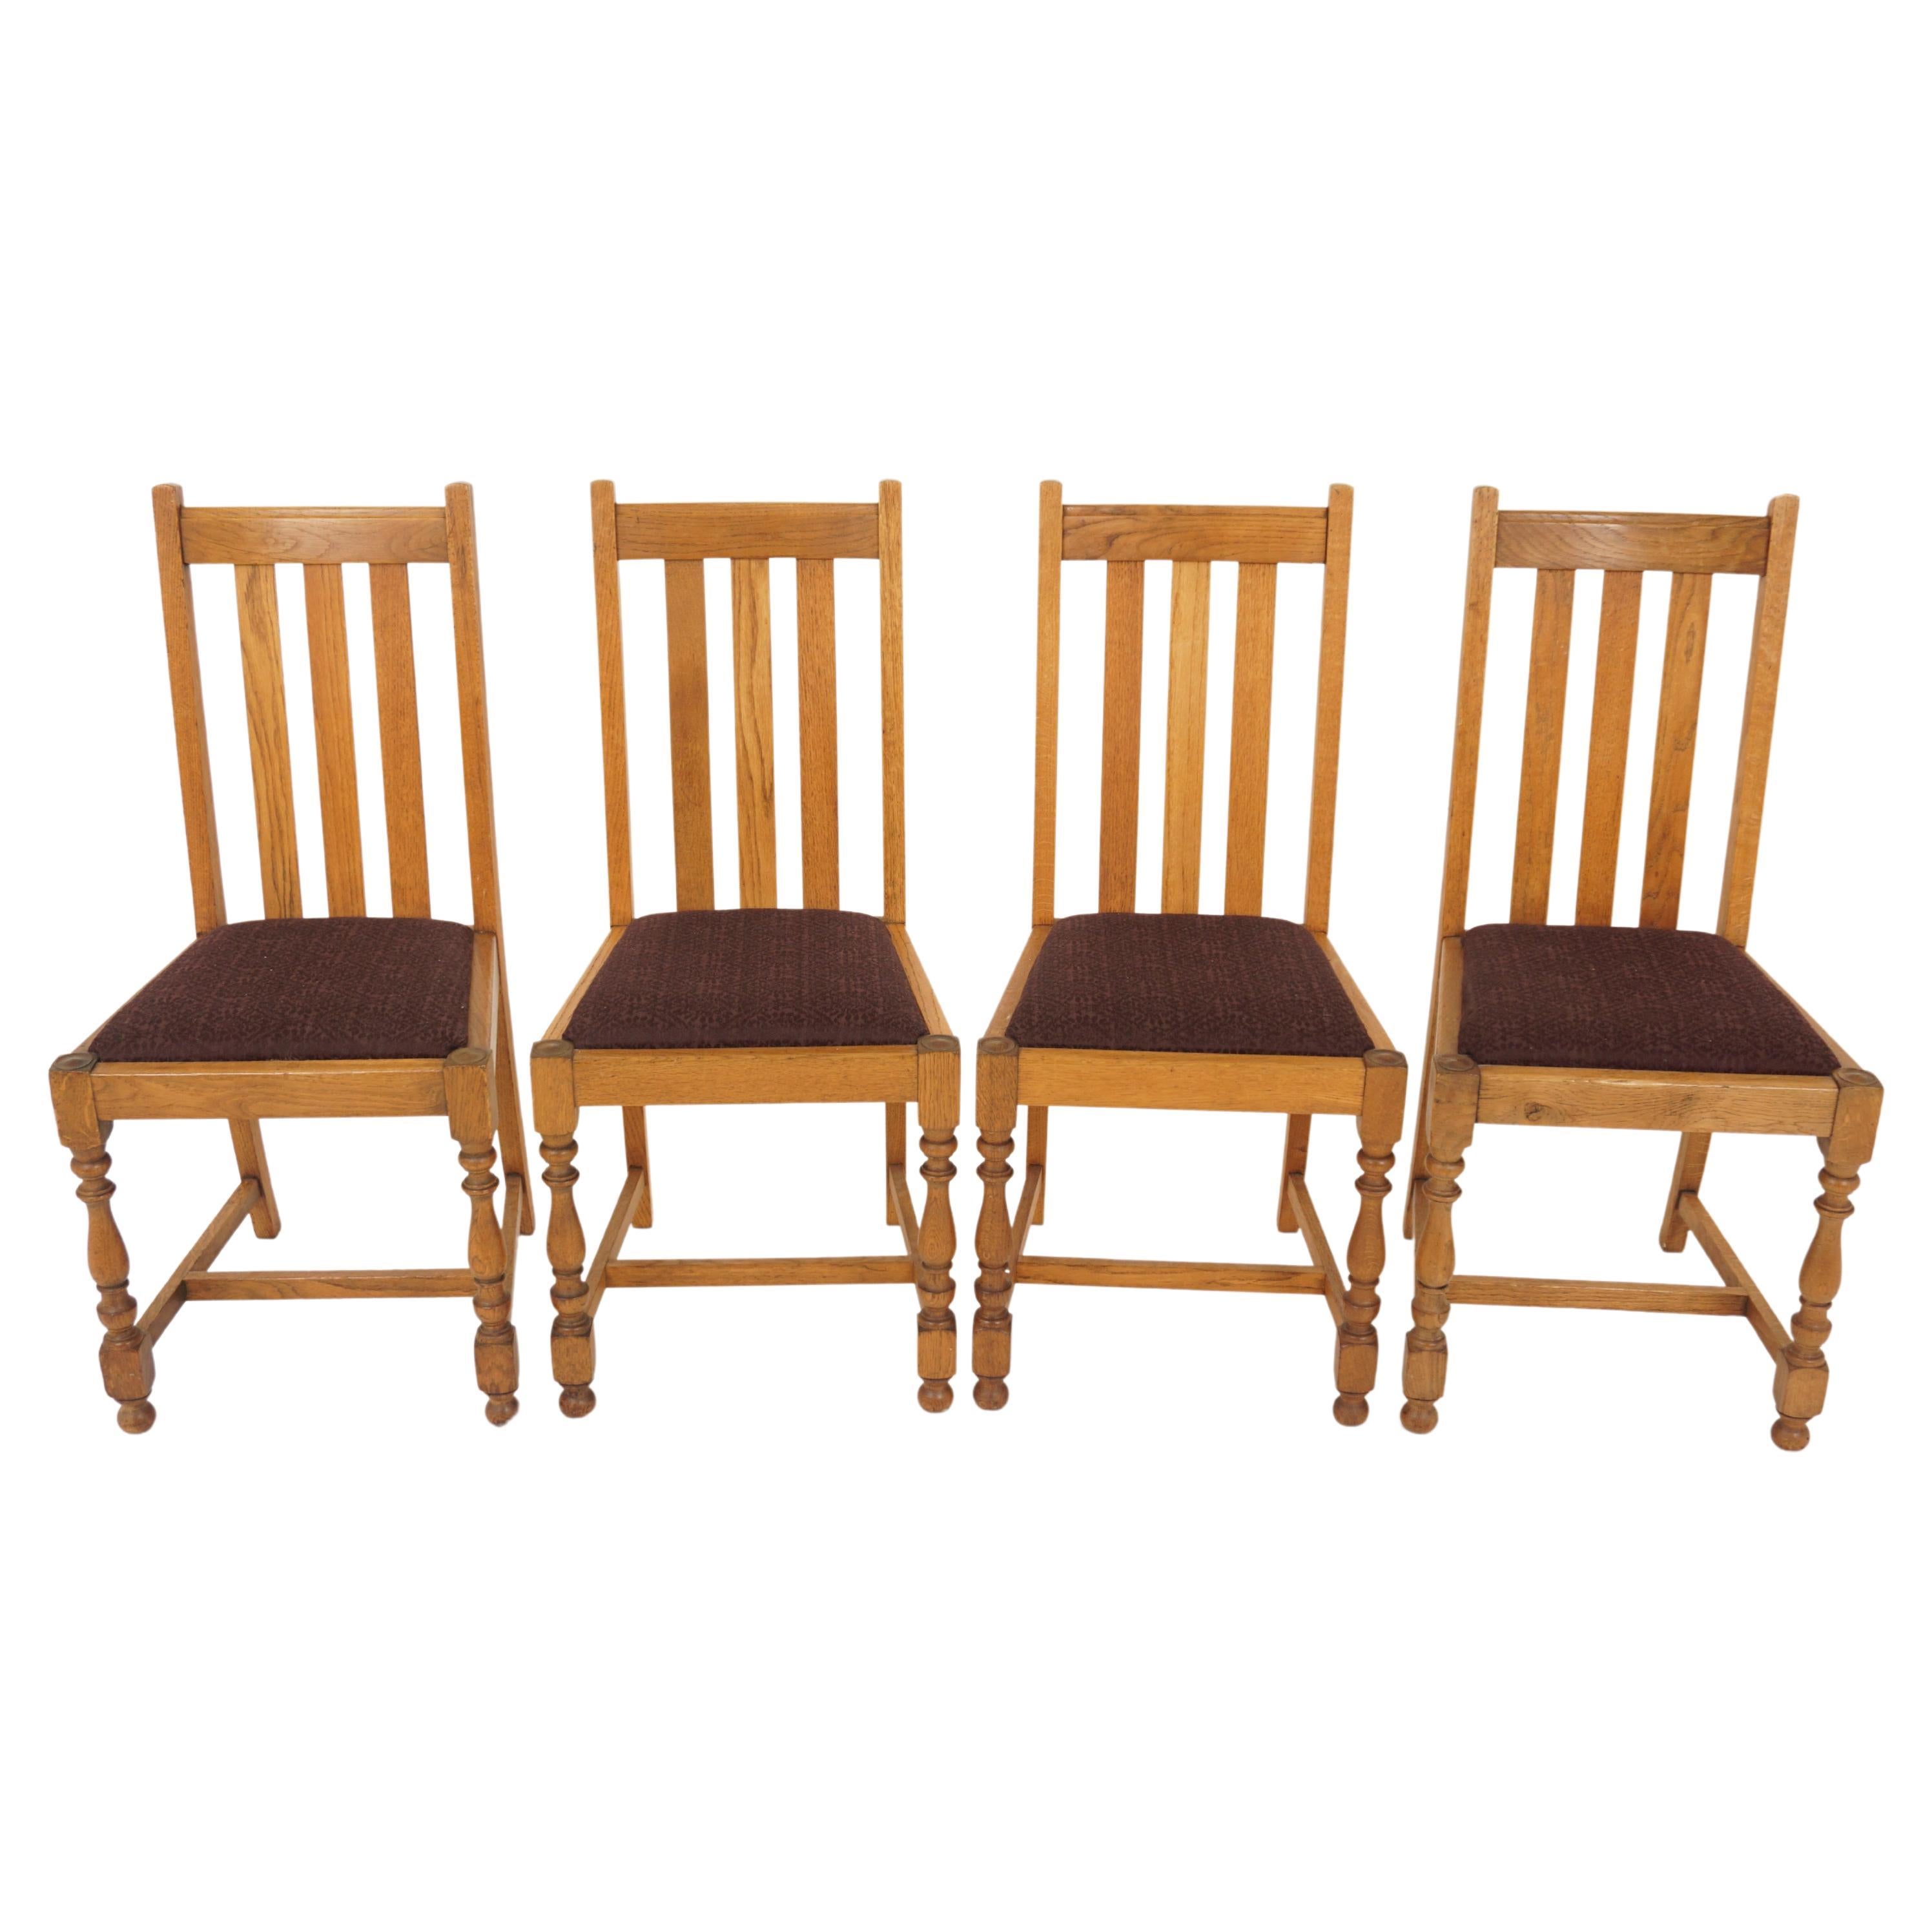 4 Vintage Solid Oak High Back Chairs, Lift Out Seats, Scotland 1920, H1201 For Sale